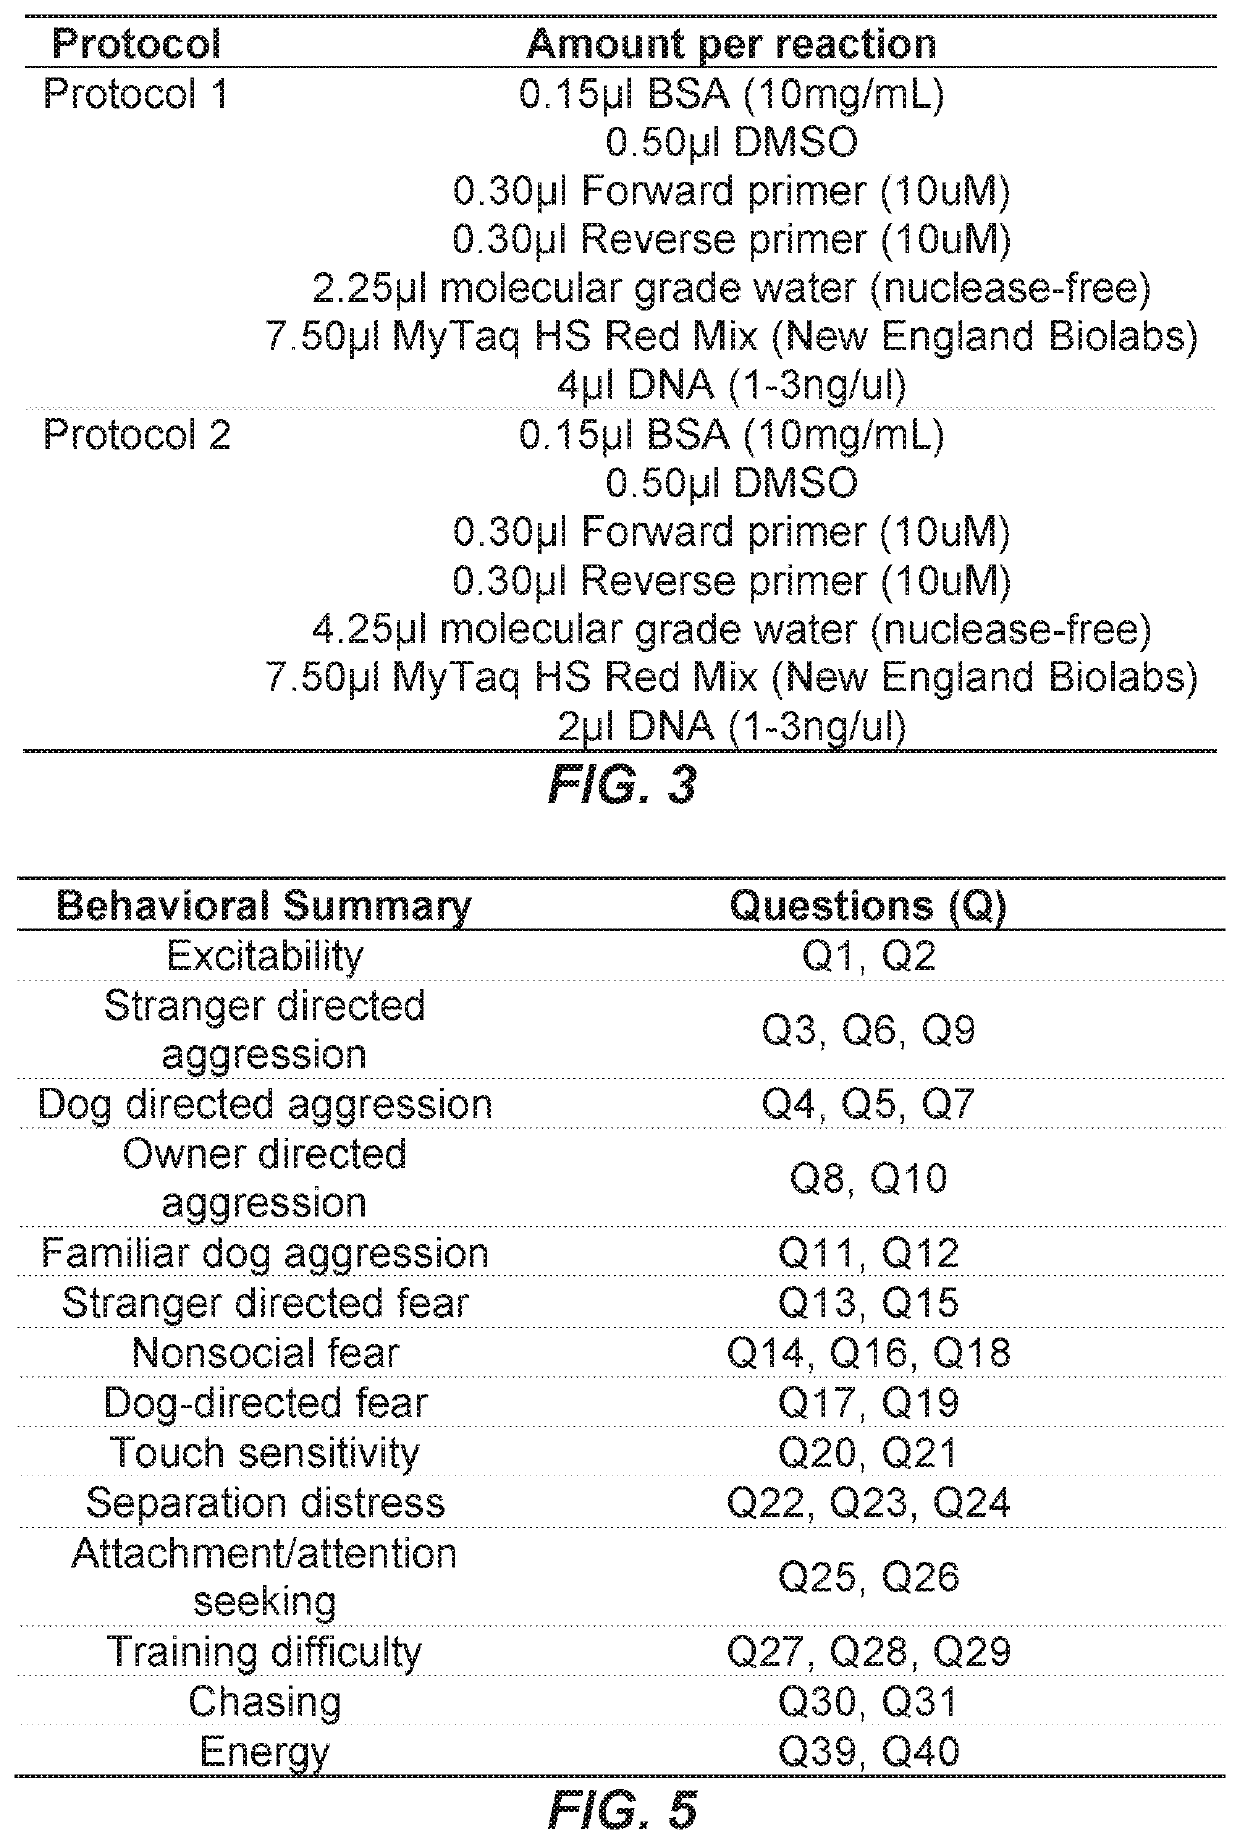 Early genetic screening to aid in the selection of dogs for assistance training programs